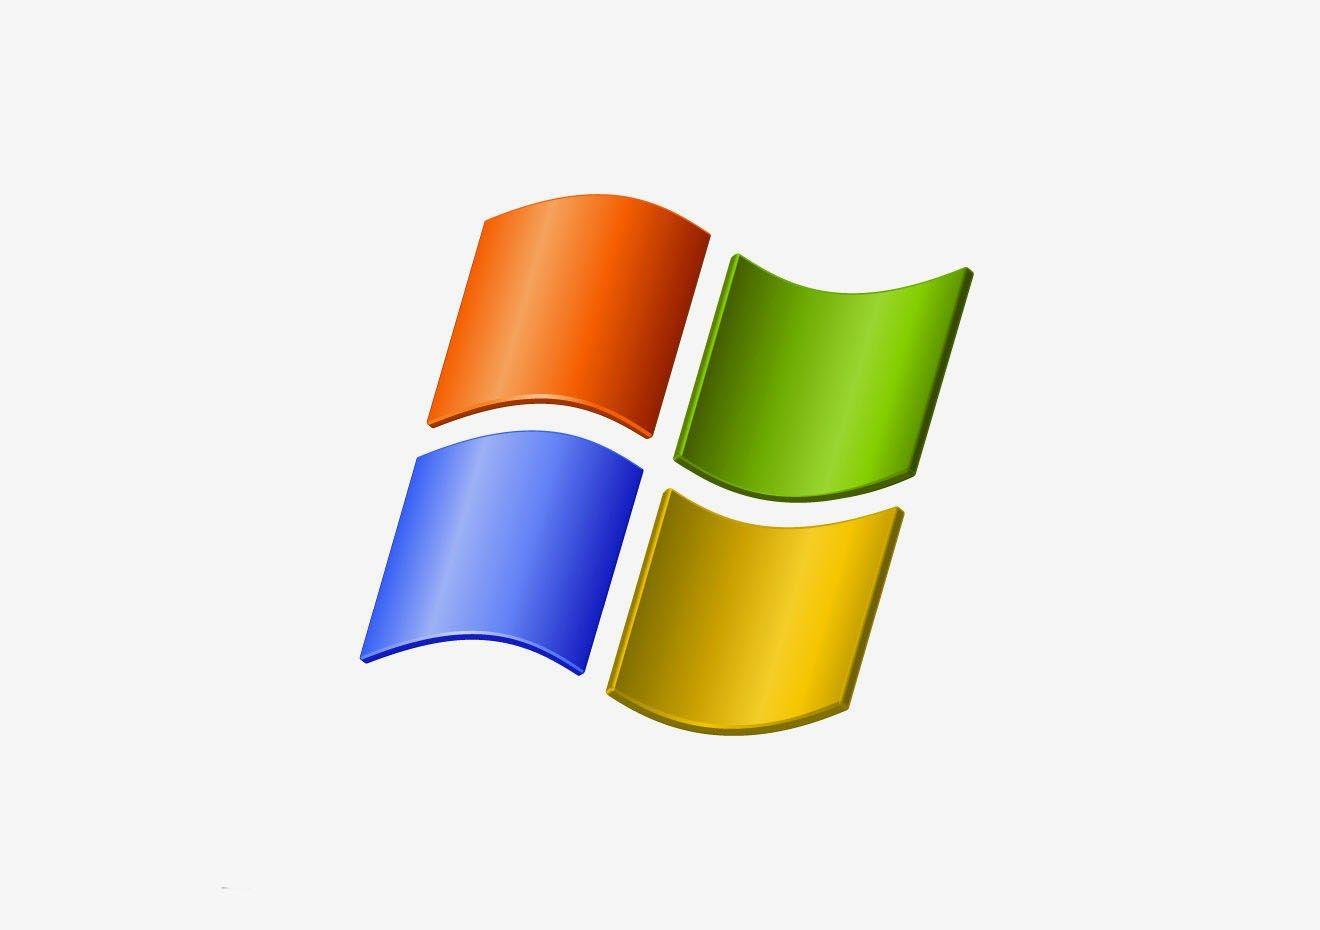 Windows 96 Logo - Windows XP Makes Ransomware and Other Threats So Much Worse | WIRED